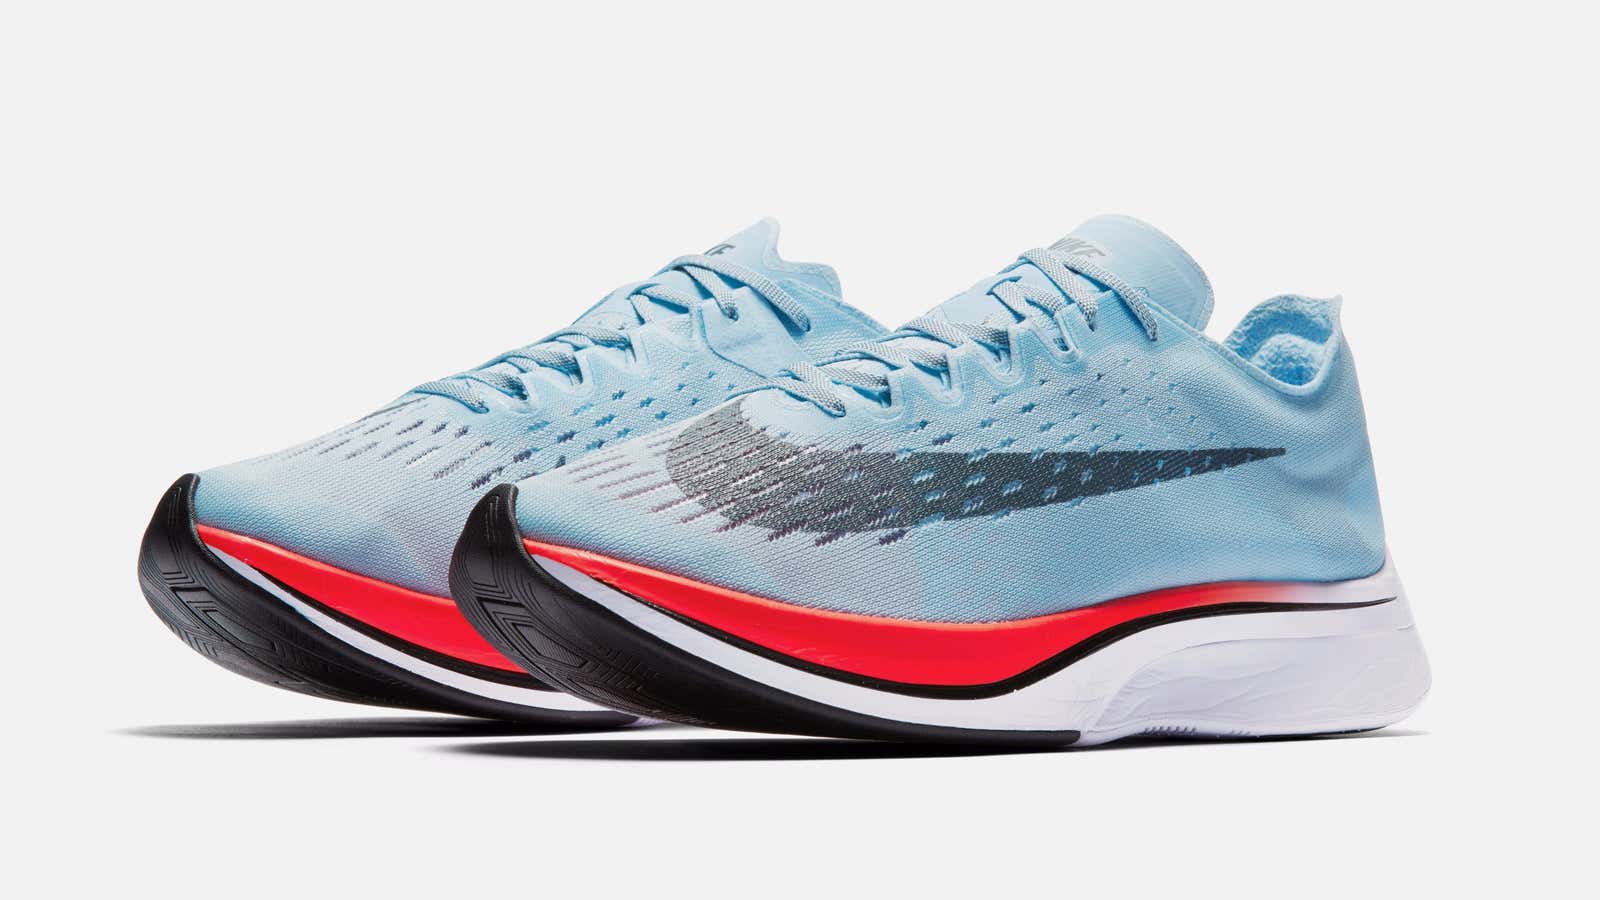 Nike's Zoom Vaporfly 4% makes you a faster says